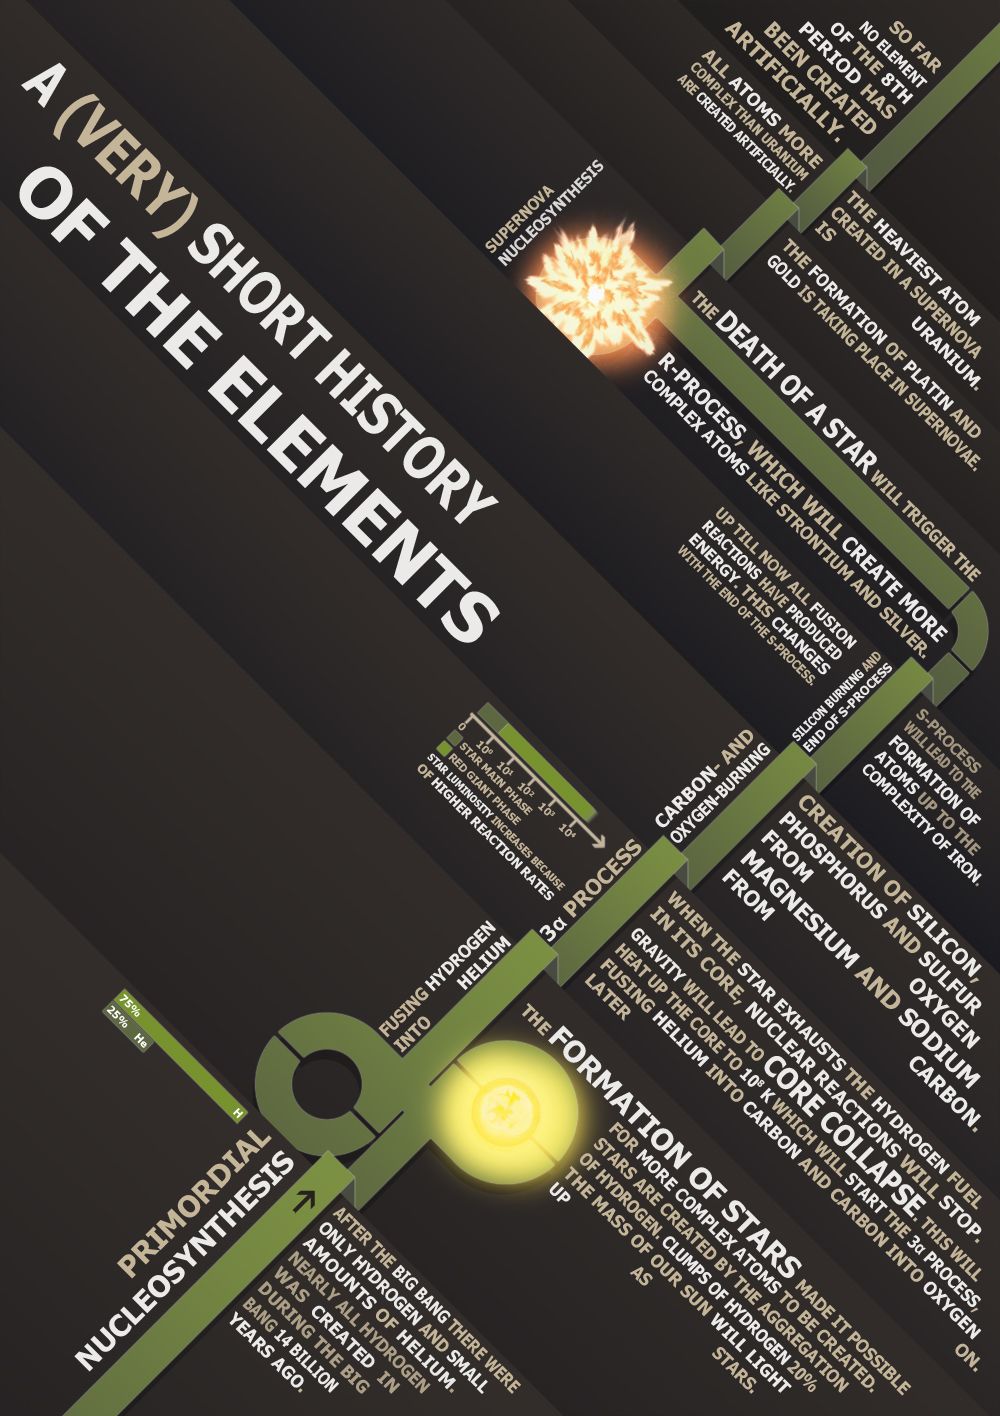 History of the Elements